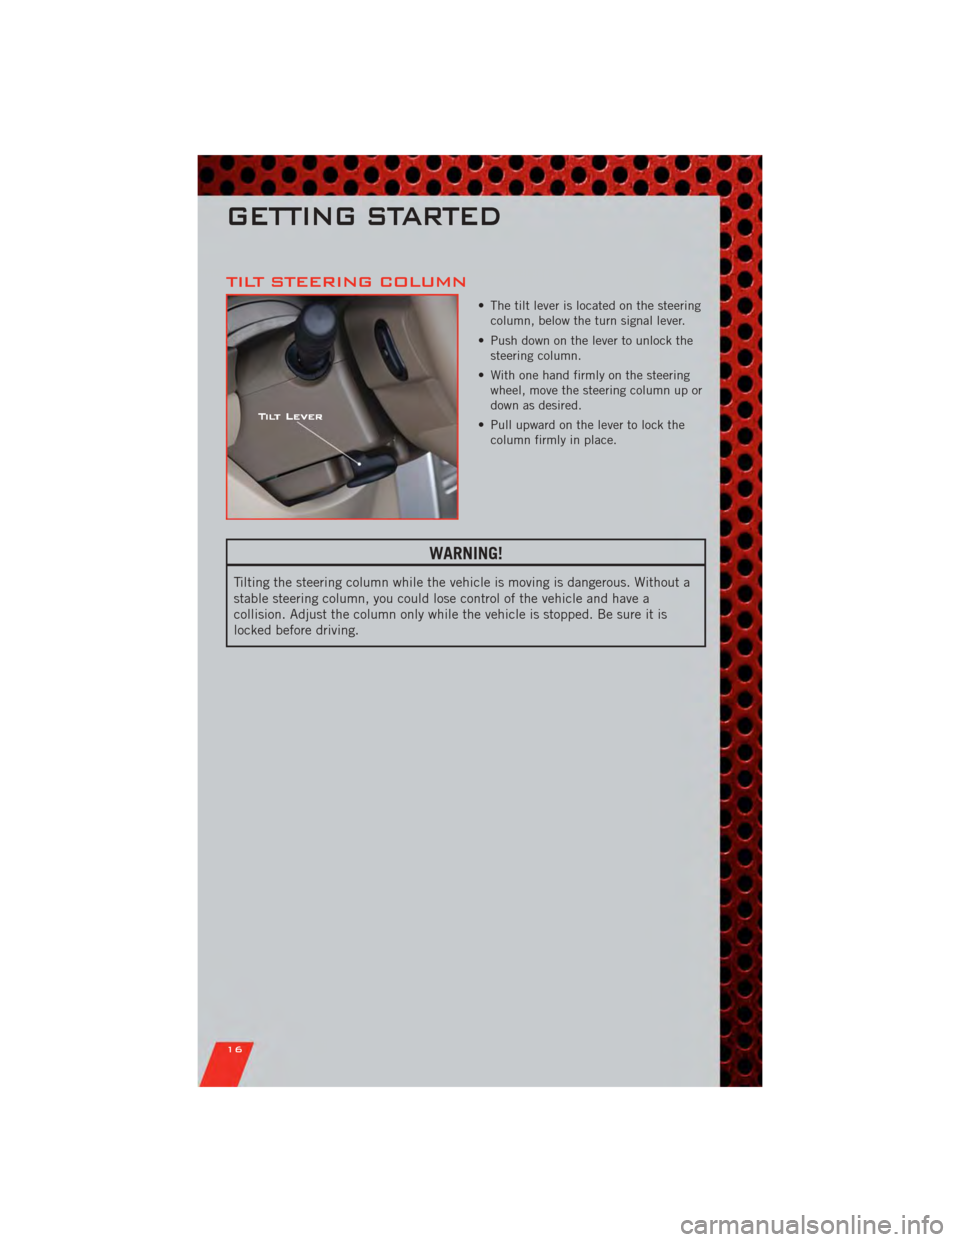 DODGE NITRO 2011 1.G User Guide TILT STEERING COLUMN
• The tilt lever is located on the steeringcolumn, below the turn signal lever.
• Push down on the lever to unlock the steering column.
• With one hand firmly on the steerin